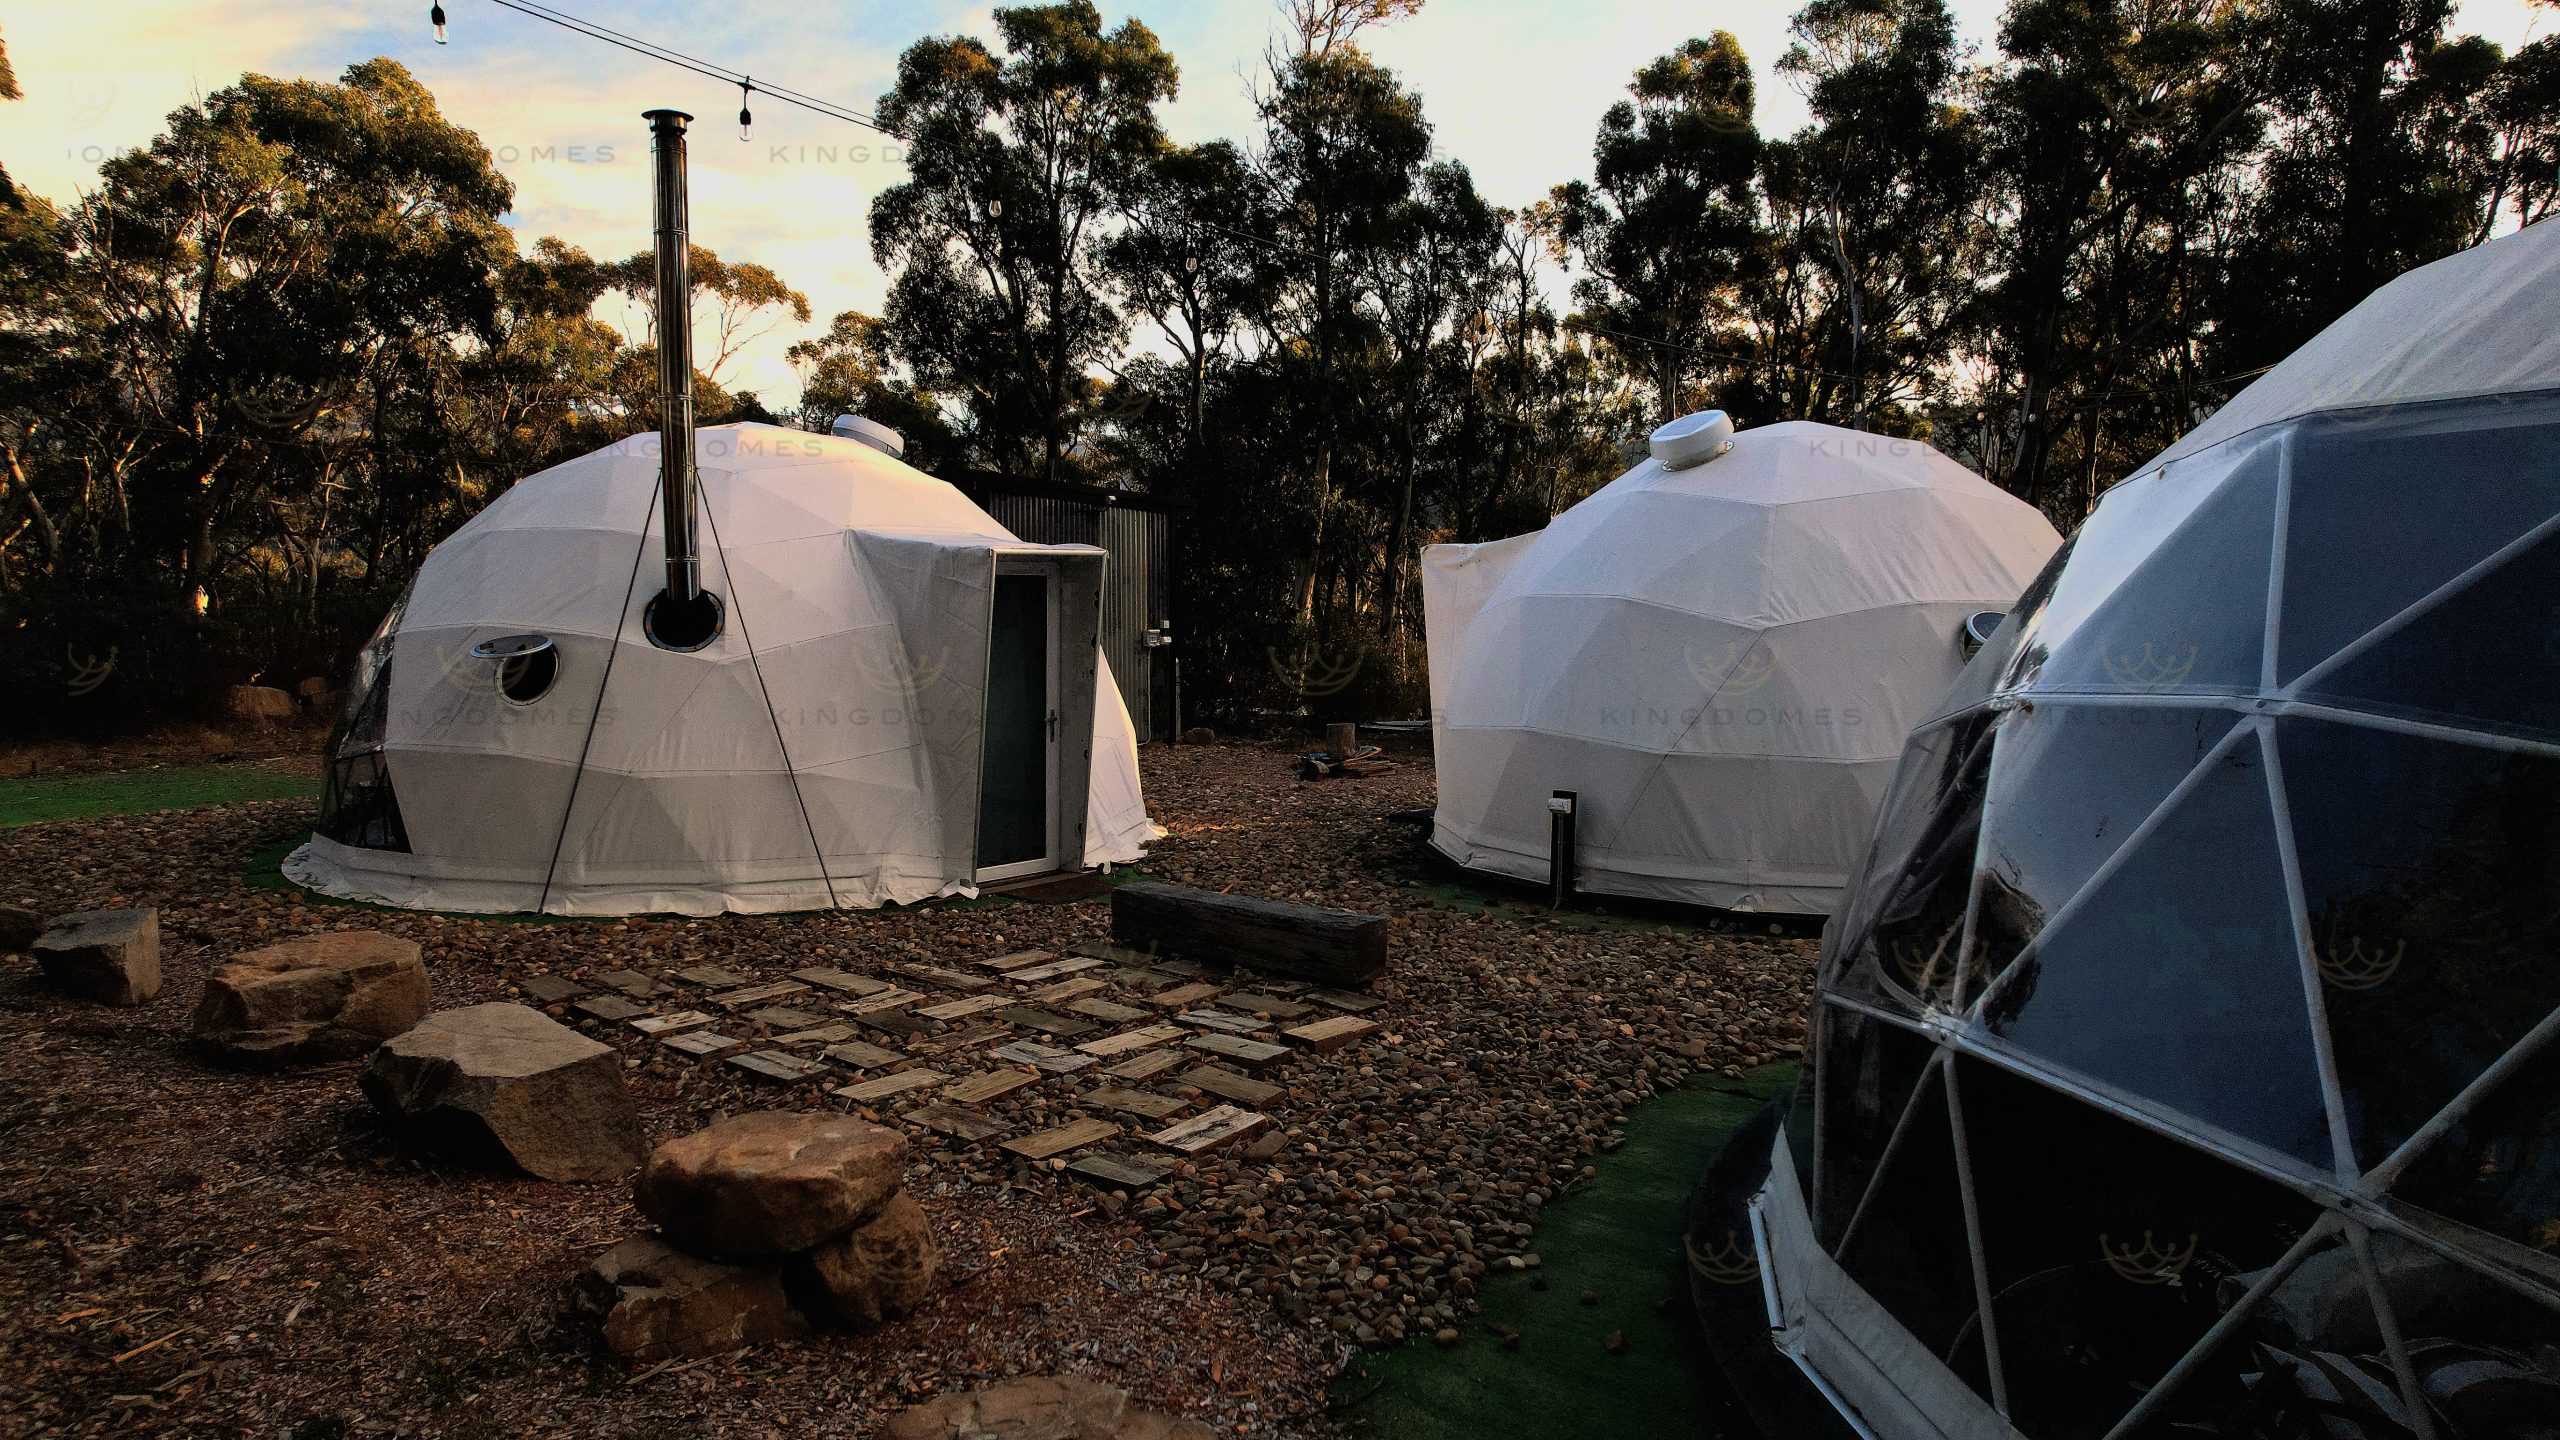 6m glamping dome King dome build